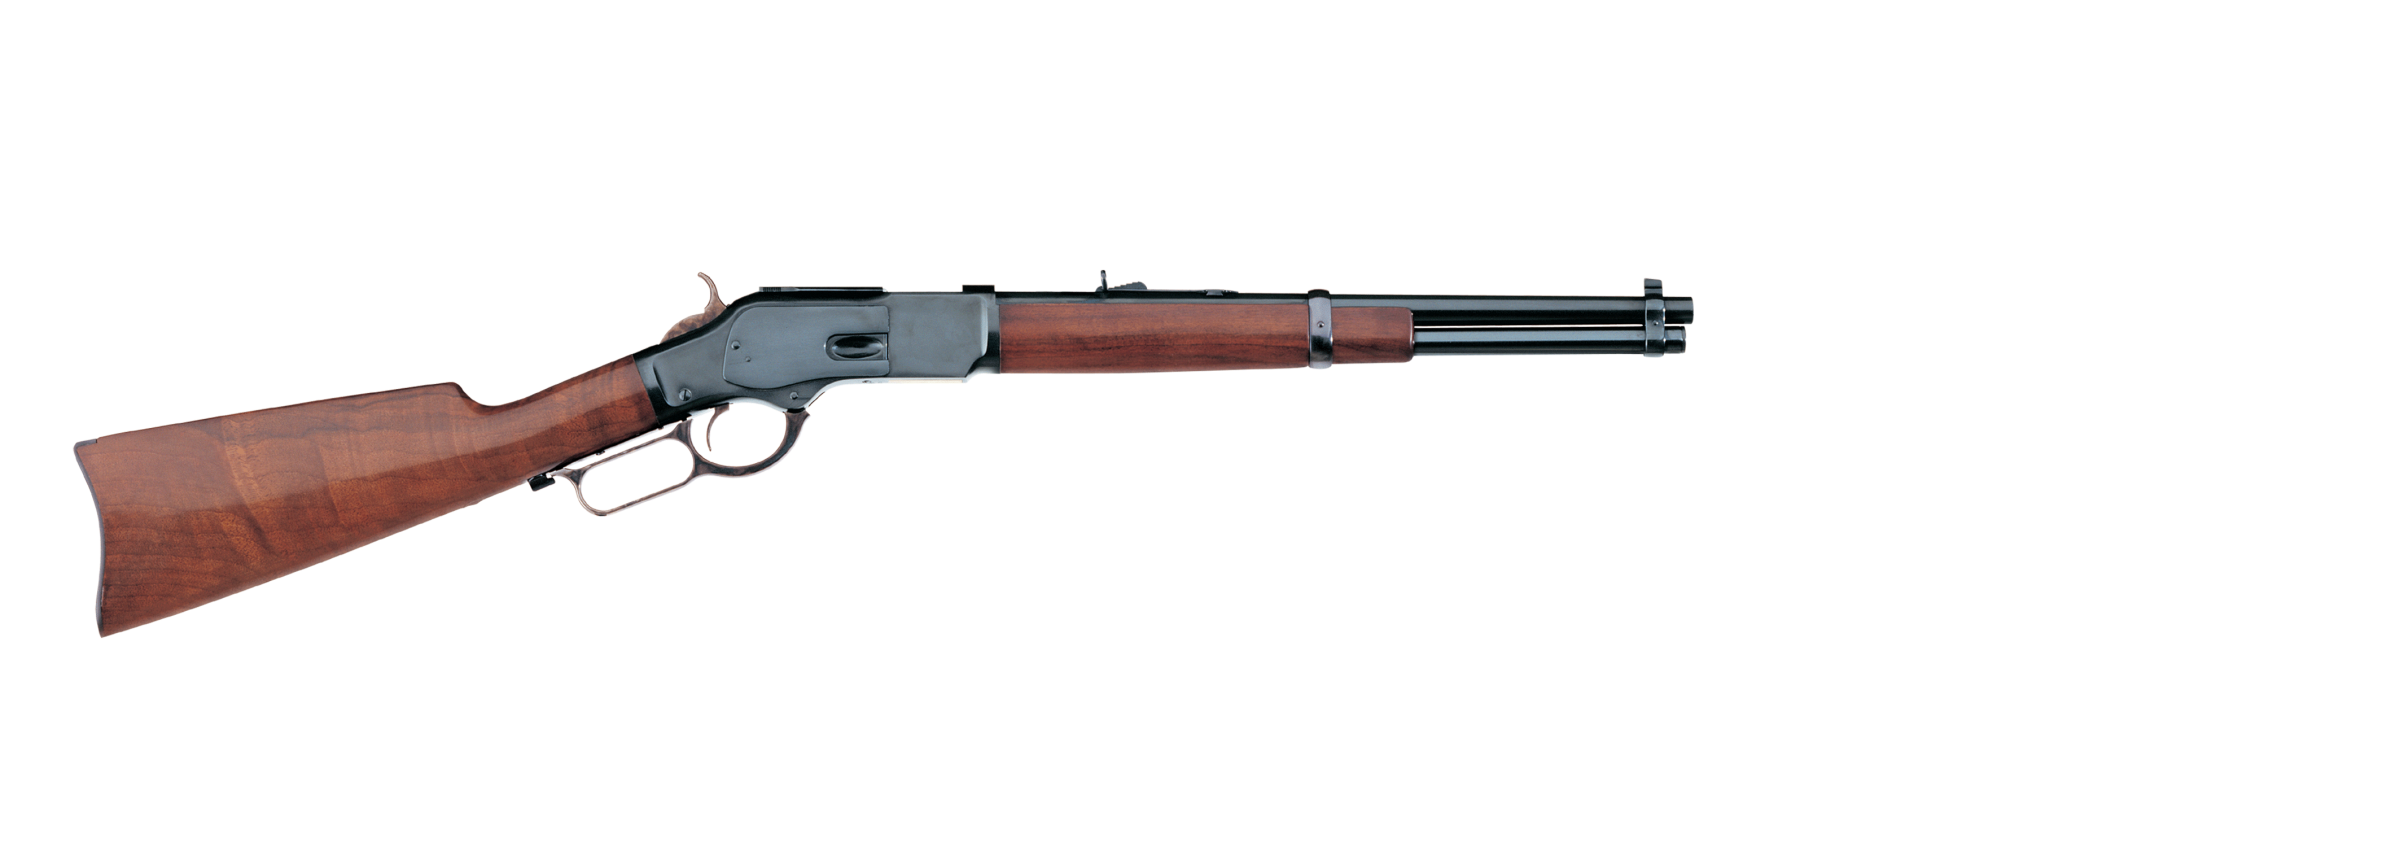 1873 Rifle and Carbine